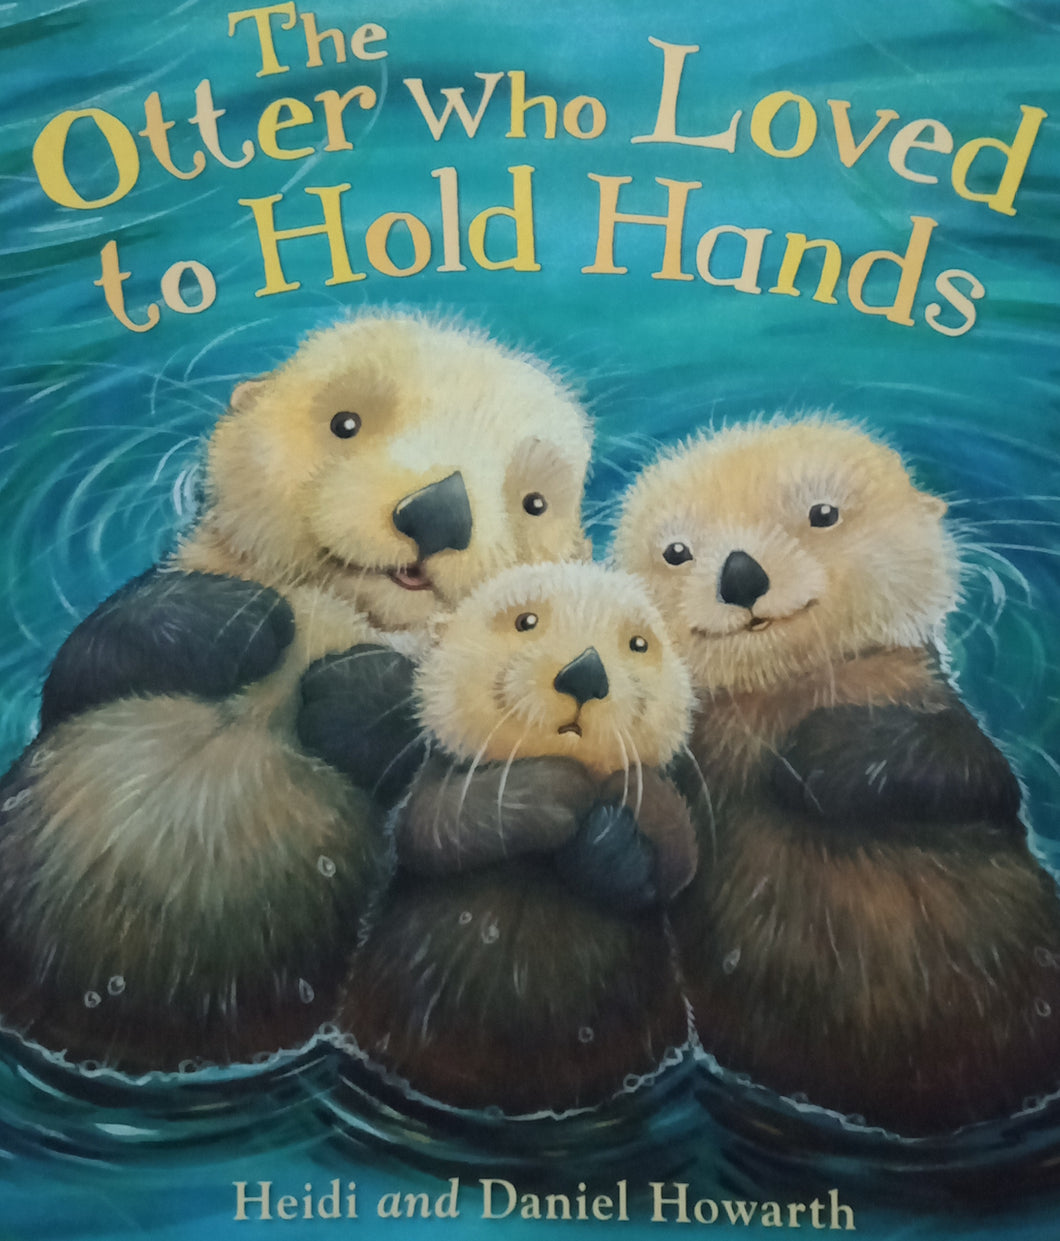 The Otter Who Loved To Hold Hands by Heidi And Daniel Howarth